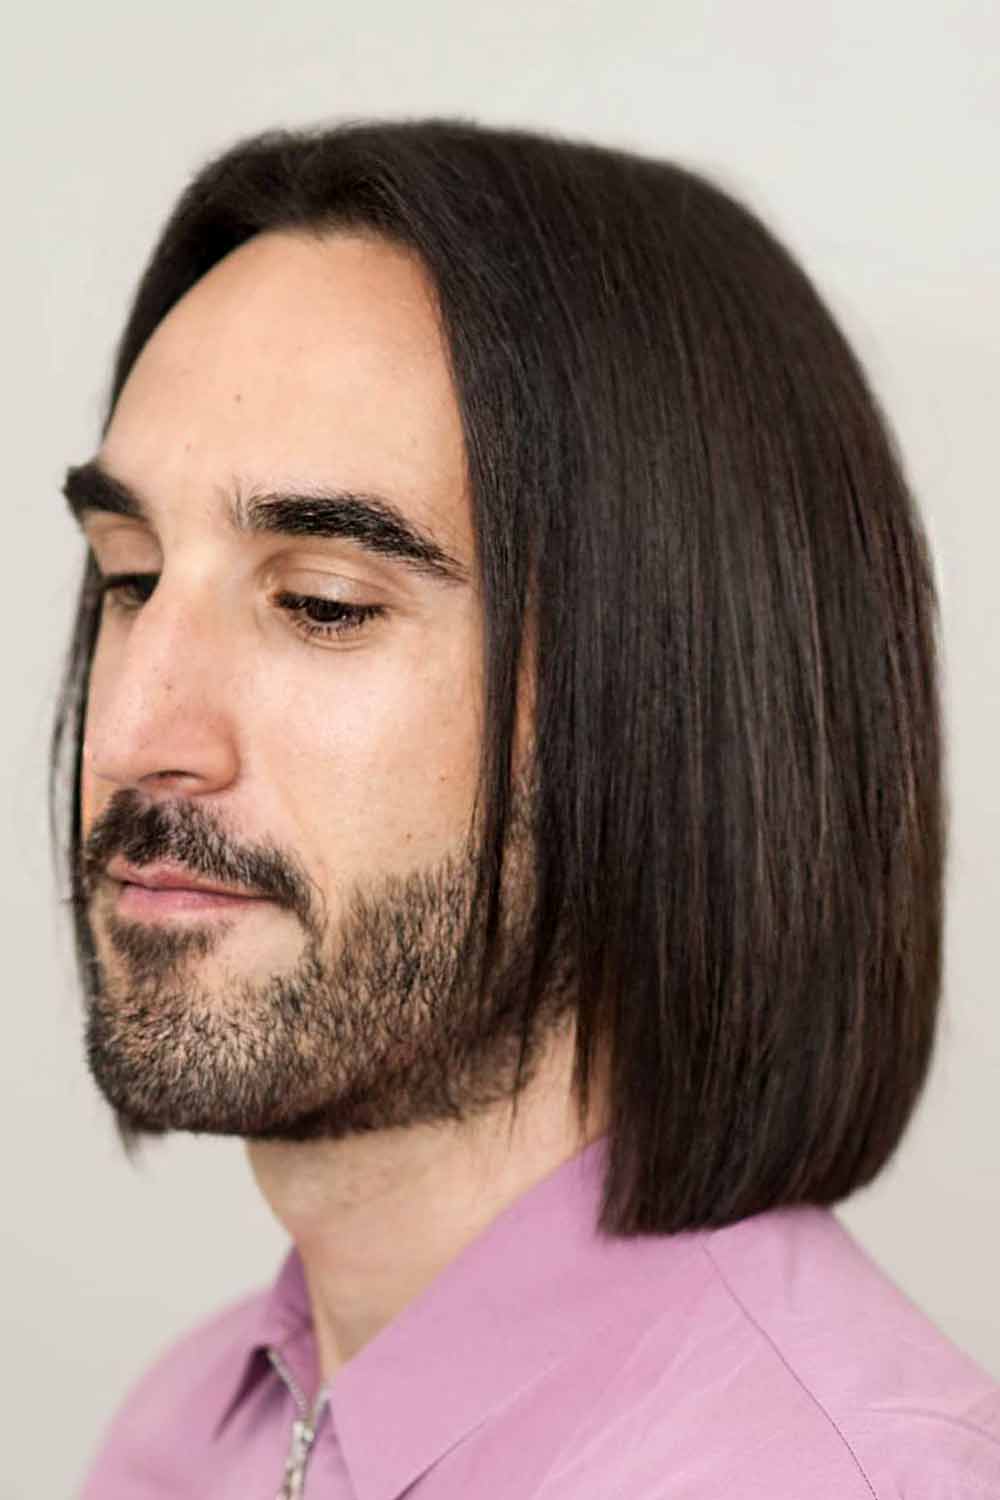 Long Straight Middle Part Hair For Men #middleparthairmen #middlepartmens #middleparthair